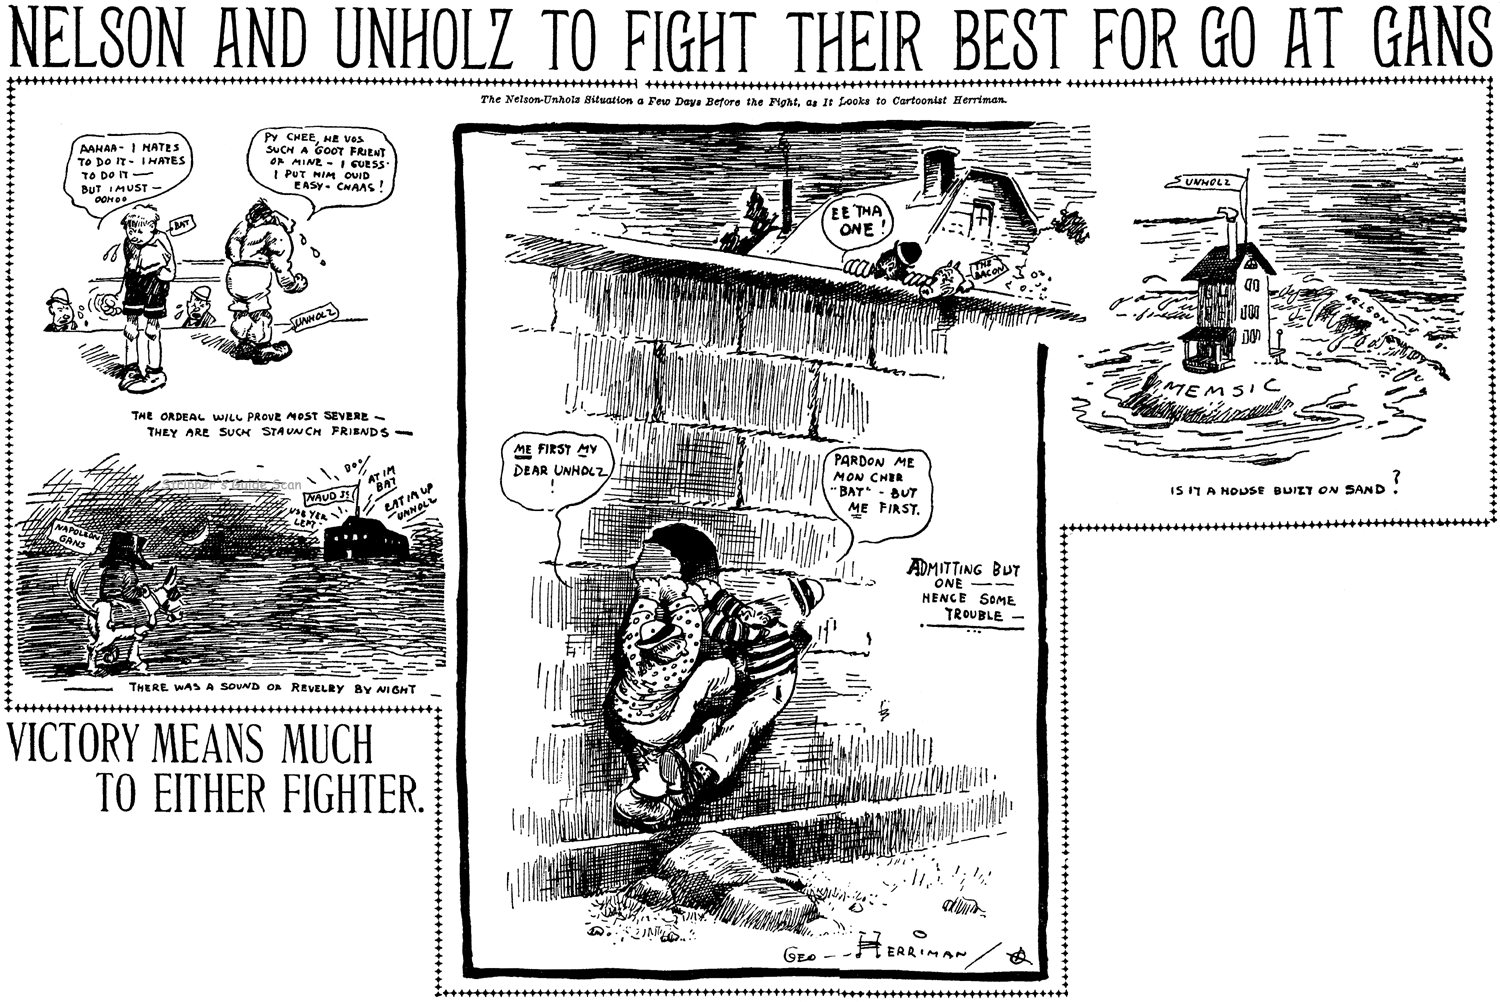 Sunday February 2 1908 Battling Nelson and Rudy Unholz are meeting in the ring on Tuesday the only time these friends shall be e ring foes